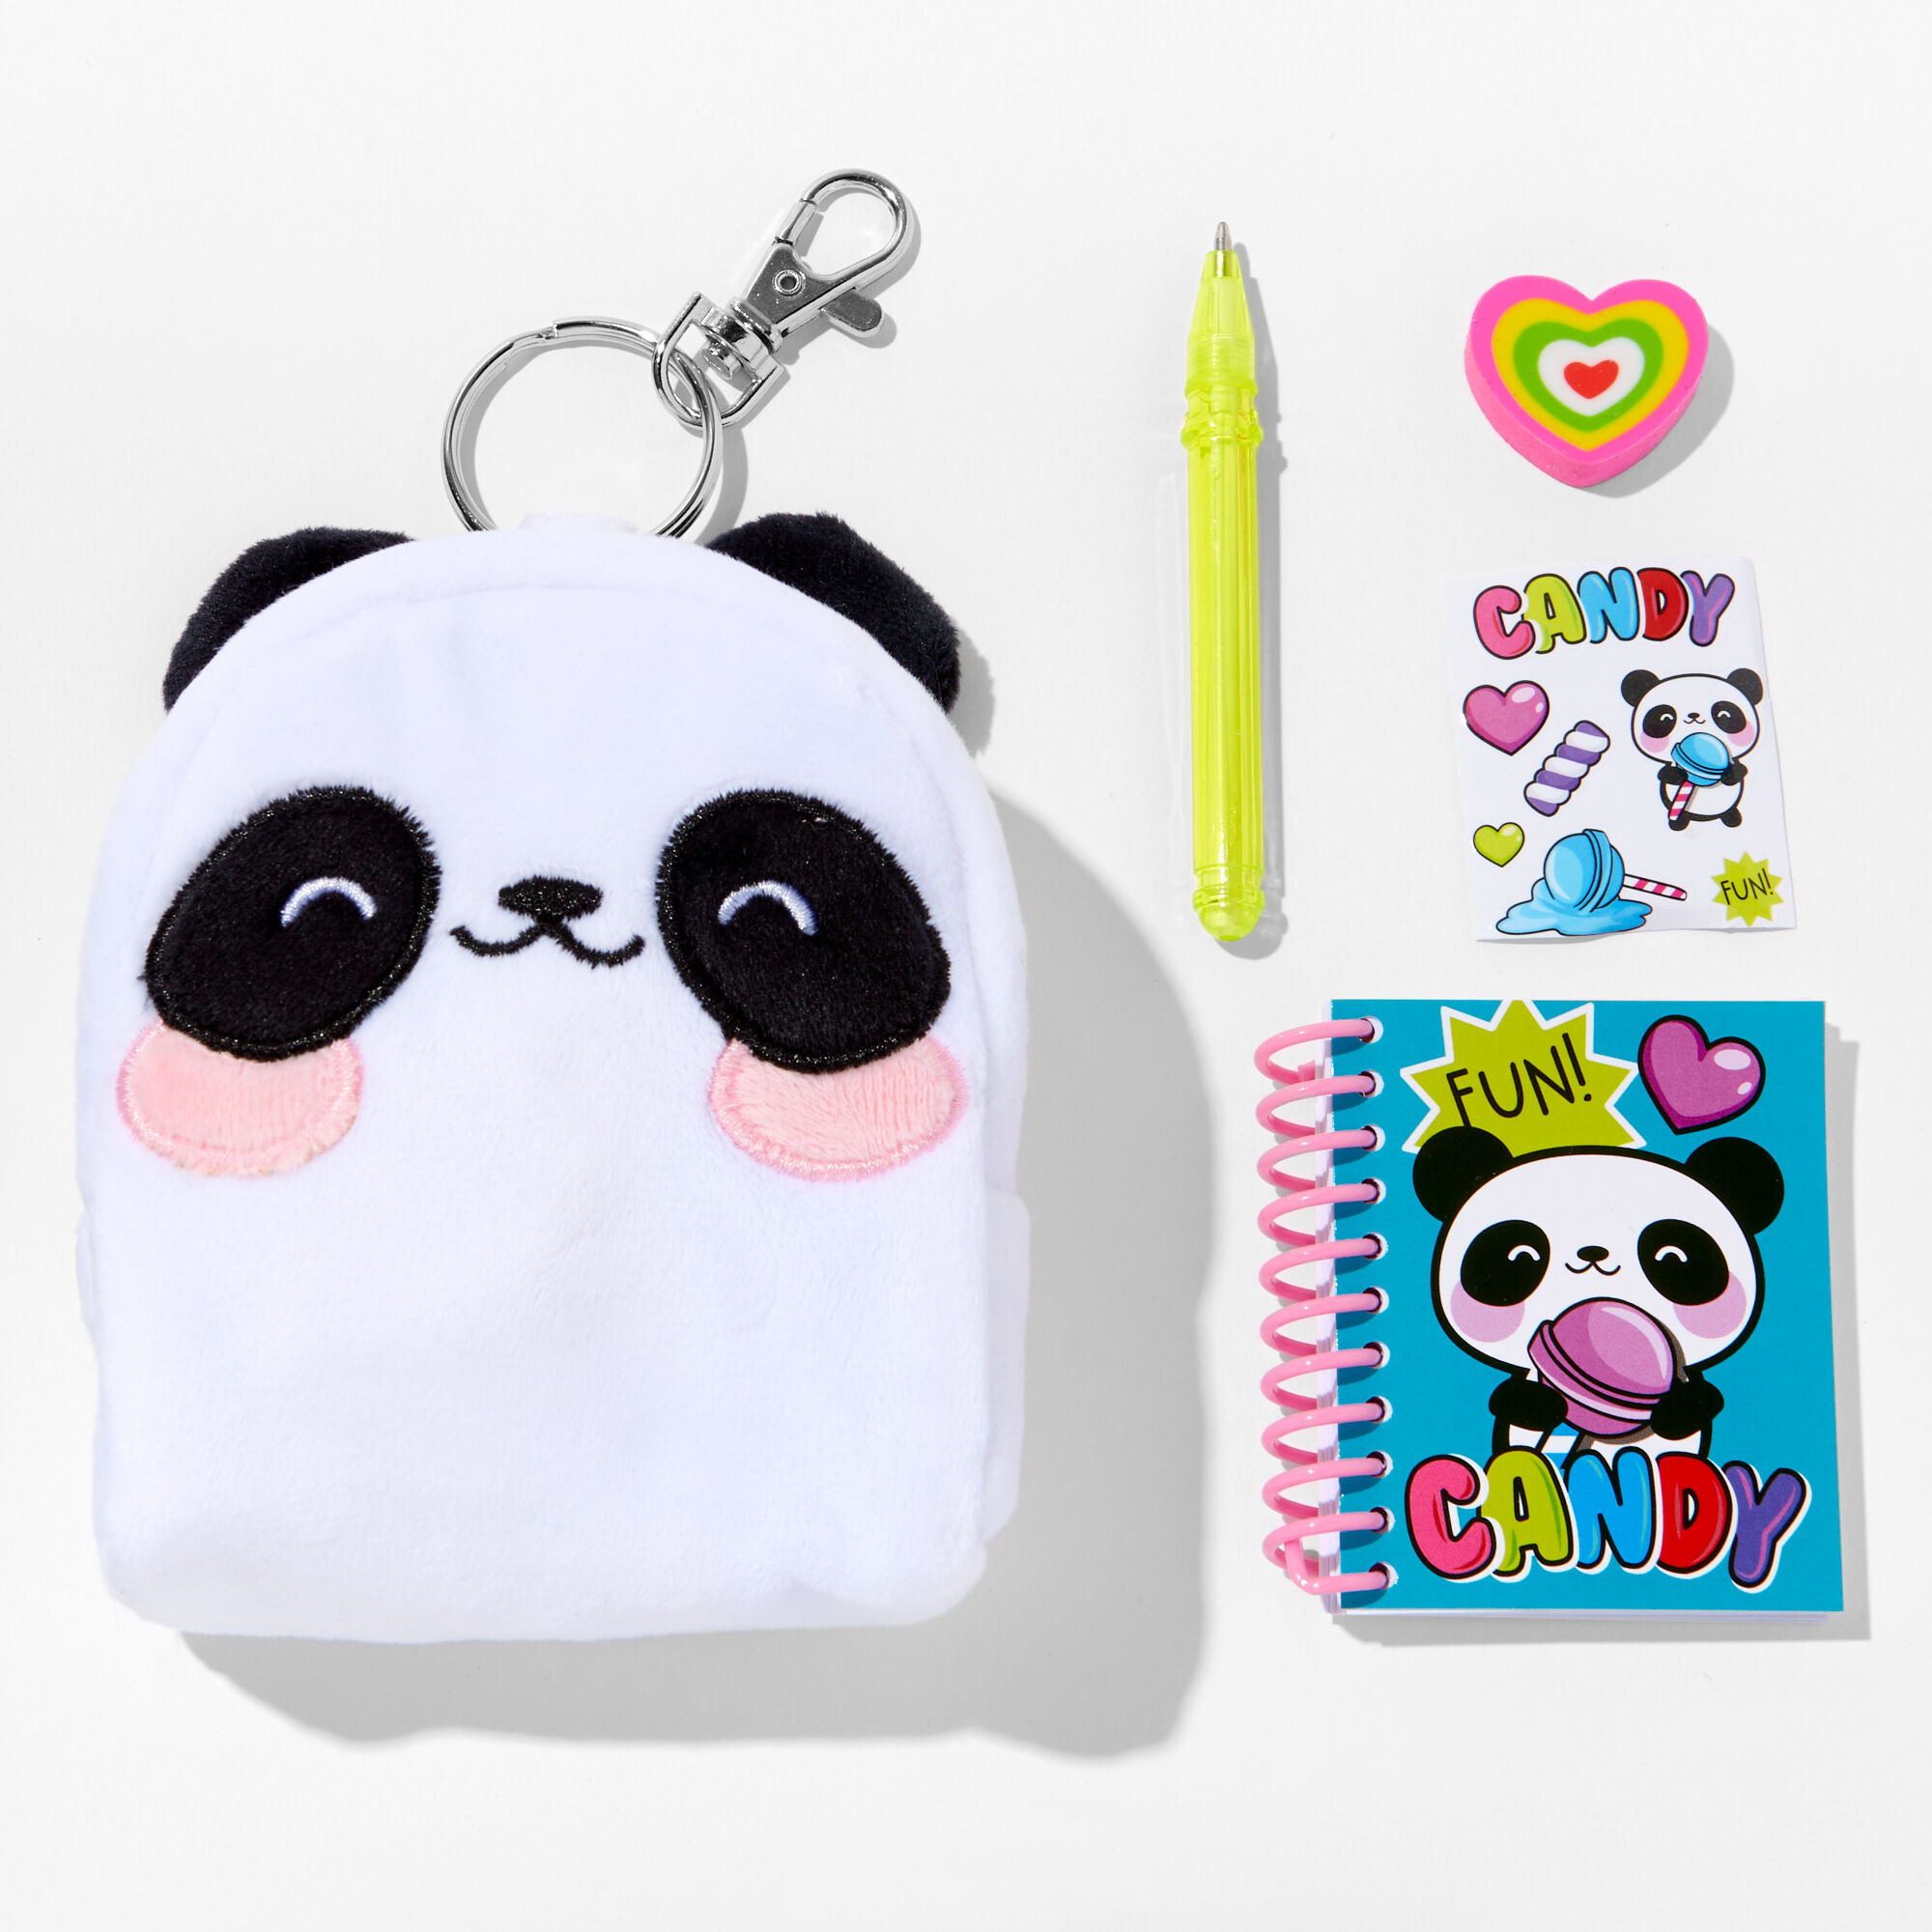 View Claires Lollipop Panda 4 Backpack Stationery Set information